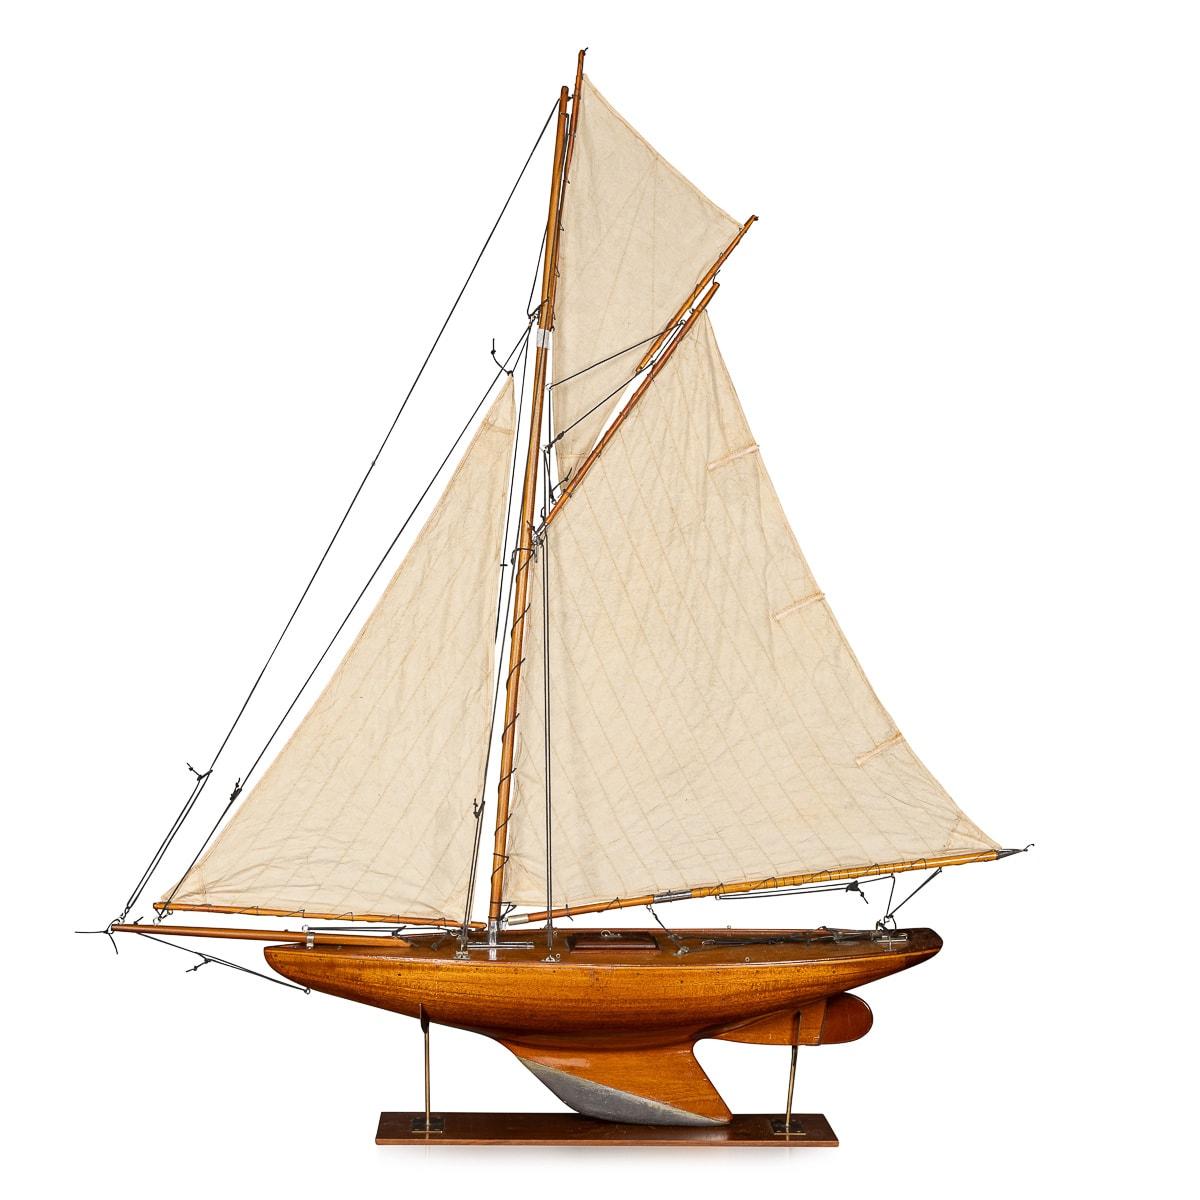 A fantastic Gaff Cutter pond yacht, lovely “bread and butter“ wood hull construction dating to the first part of the 20th Century. Bread and butter construction is when planks of wood are stacked on top of each other (the bread) and then stuck